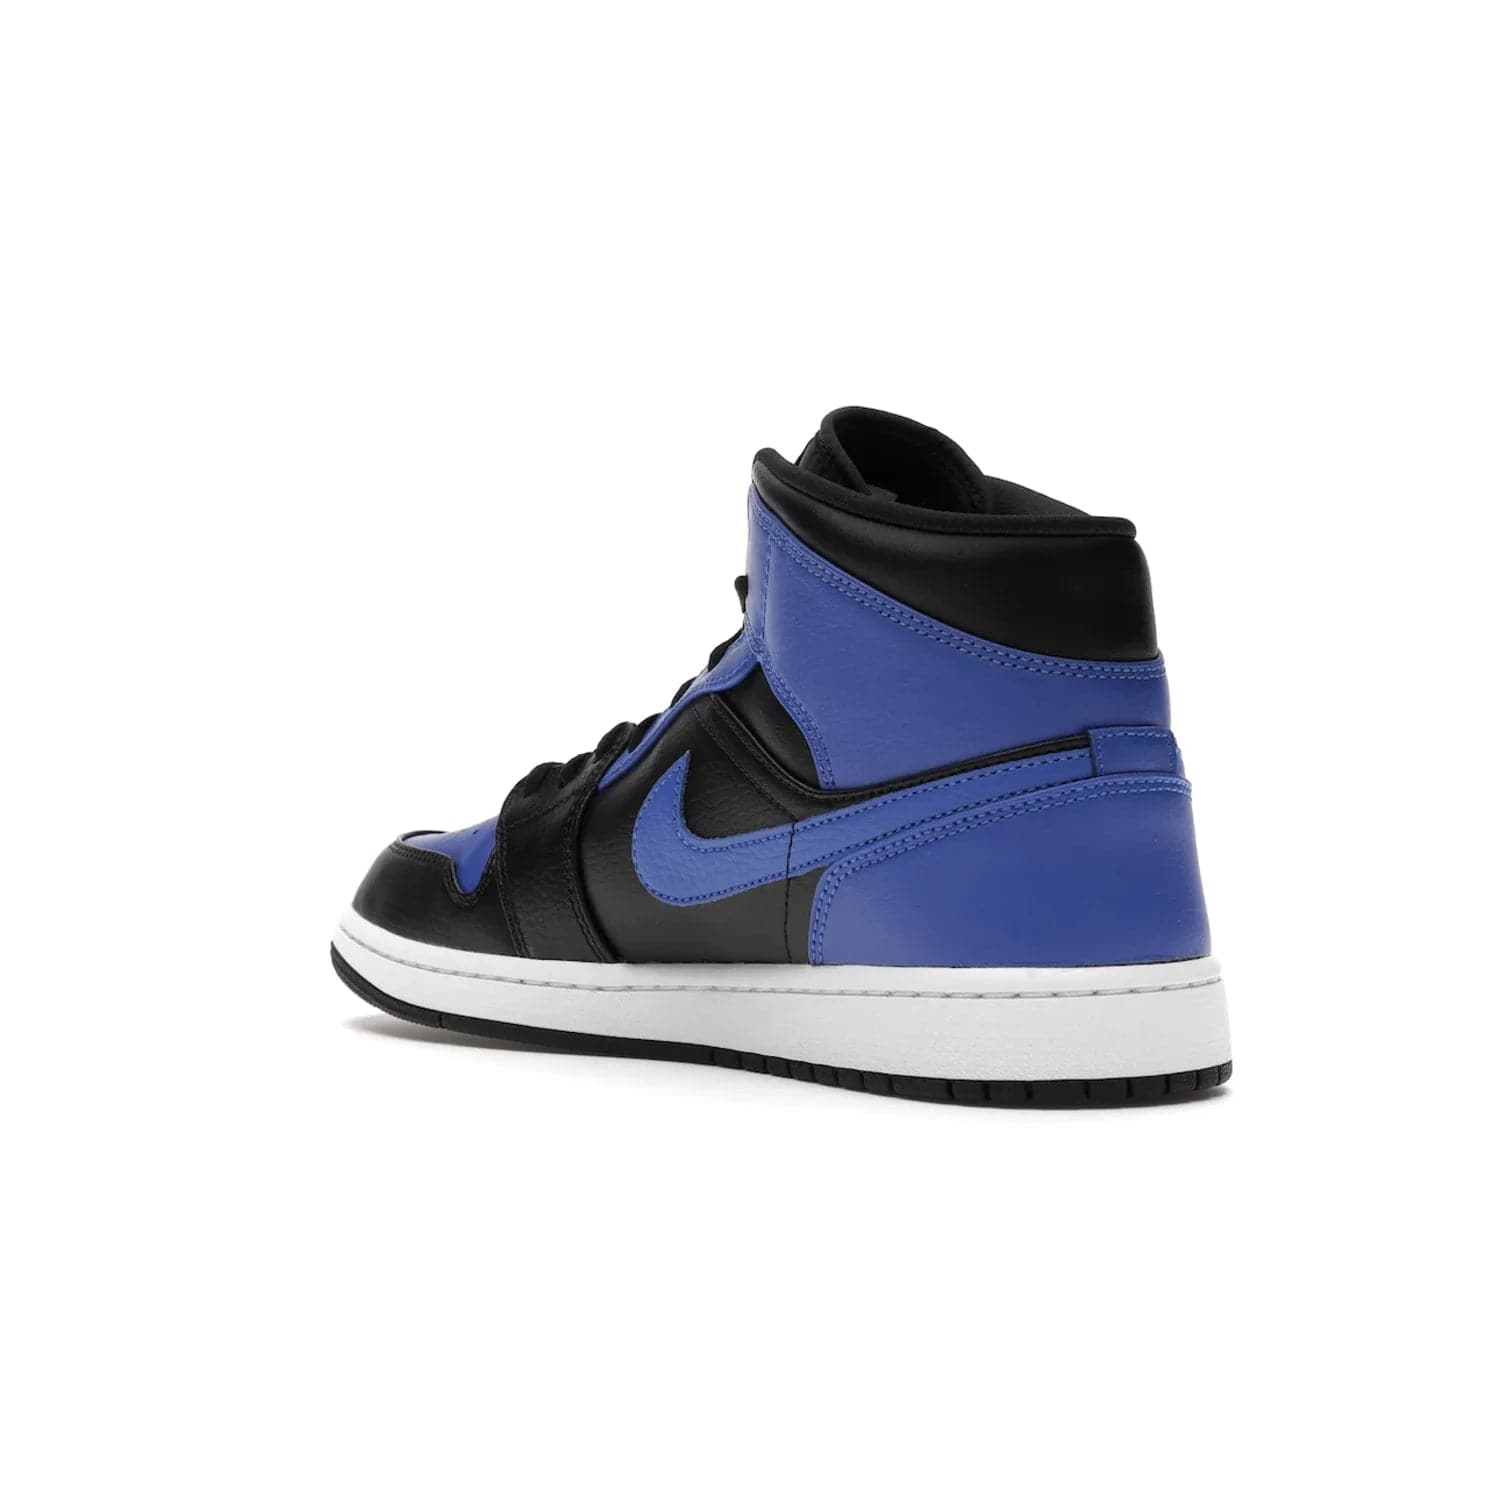 Jordan 1 Mid Hyper Royal Tumbled Leather - Image 24 - Only at www.BallersClubKickz.com - Iconic colorway of the Air Jordan 1 Mid Black Royal Tumbled Leather. Features a black tumbled leather upper, royal blue leather overlays, white midsole & black rubber outsole. Released December 2020. Adds premium style to any collection.